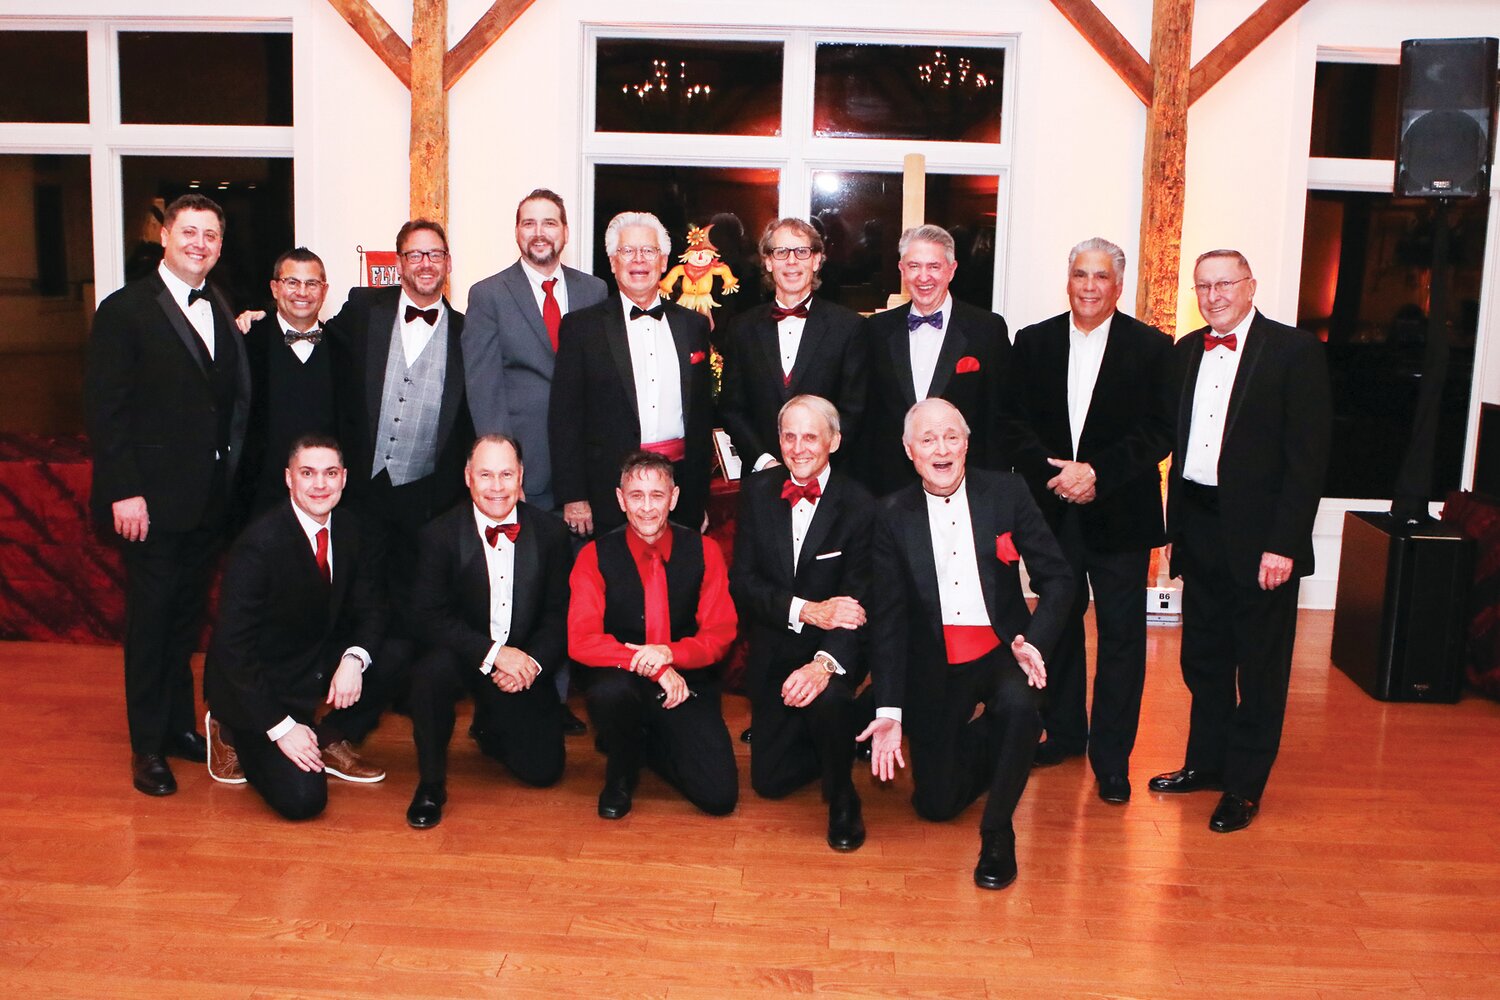 Gentlemen all dressed up for the Red Ball Gala.